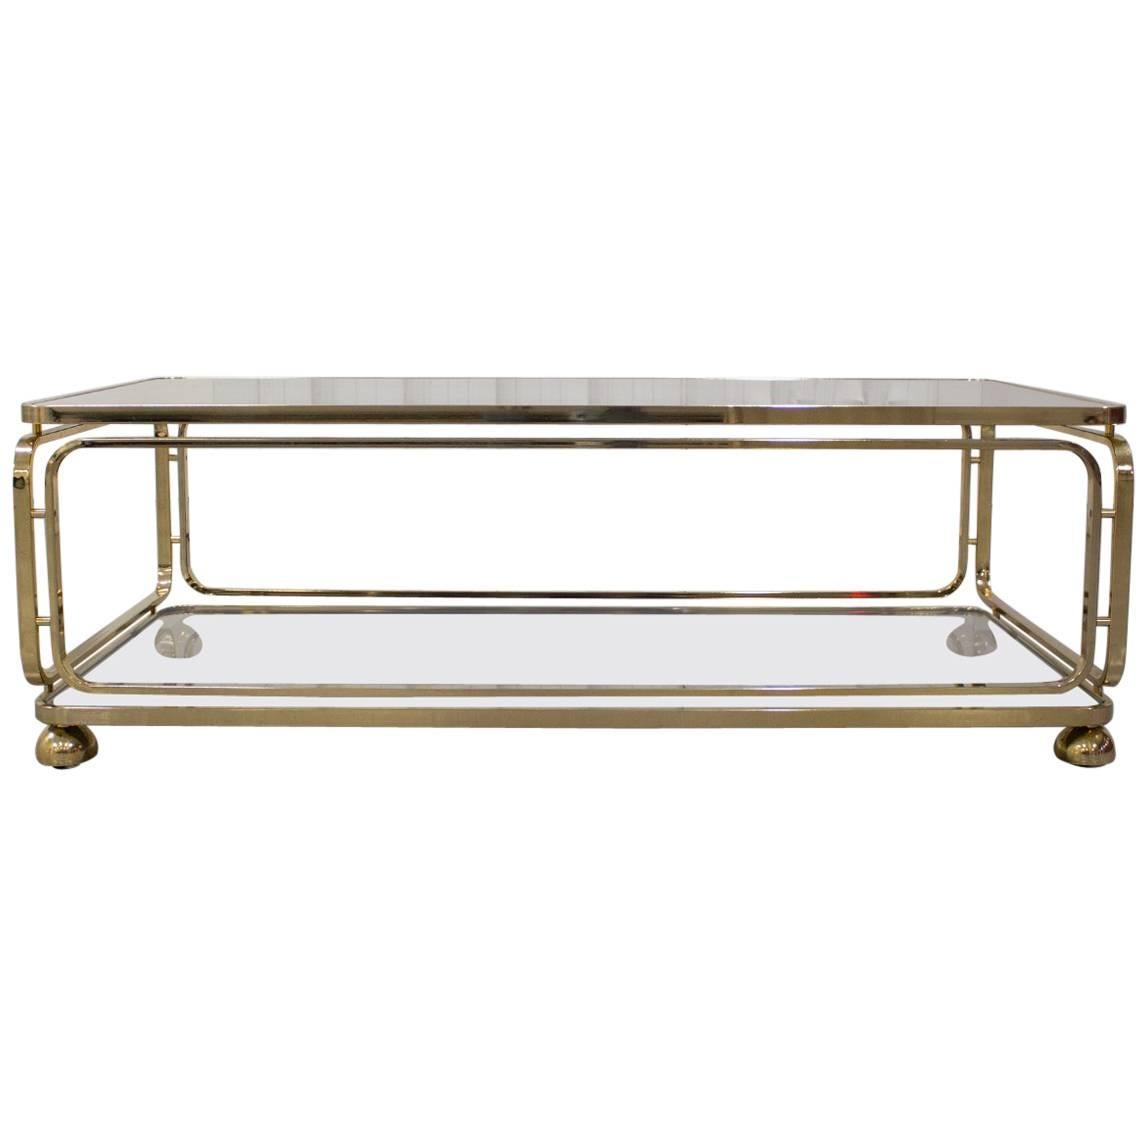 Brass Regency Style Coffee Table with Glass and Mirror Inlay